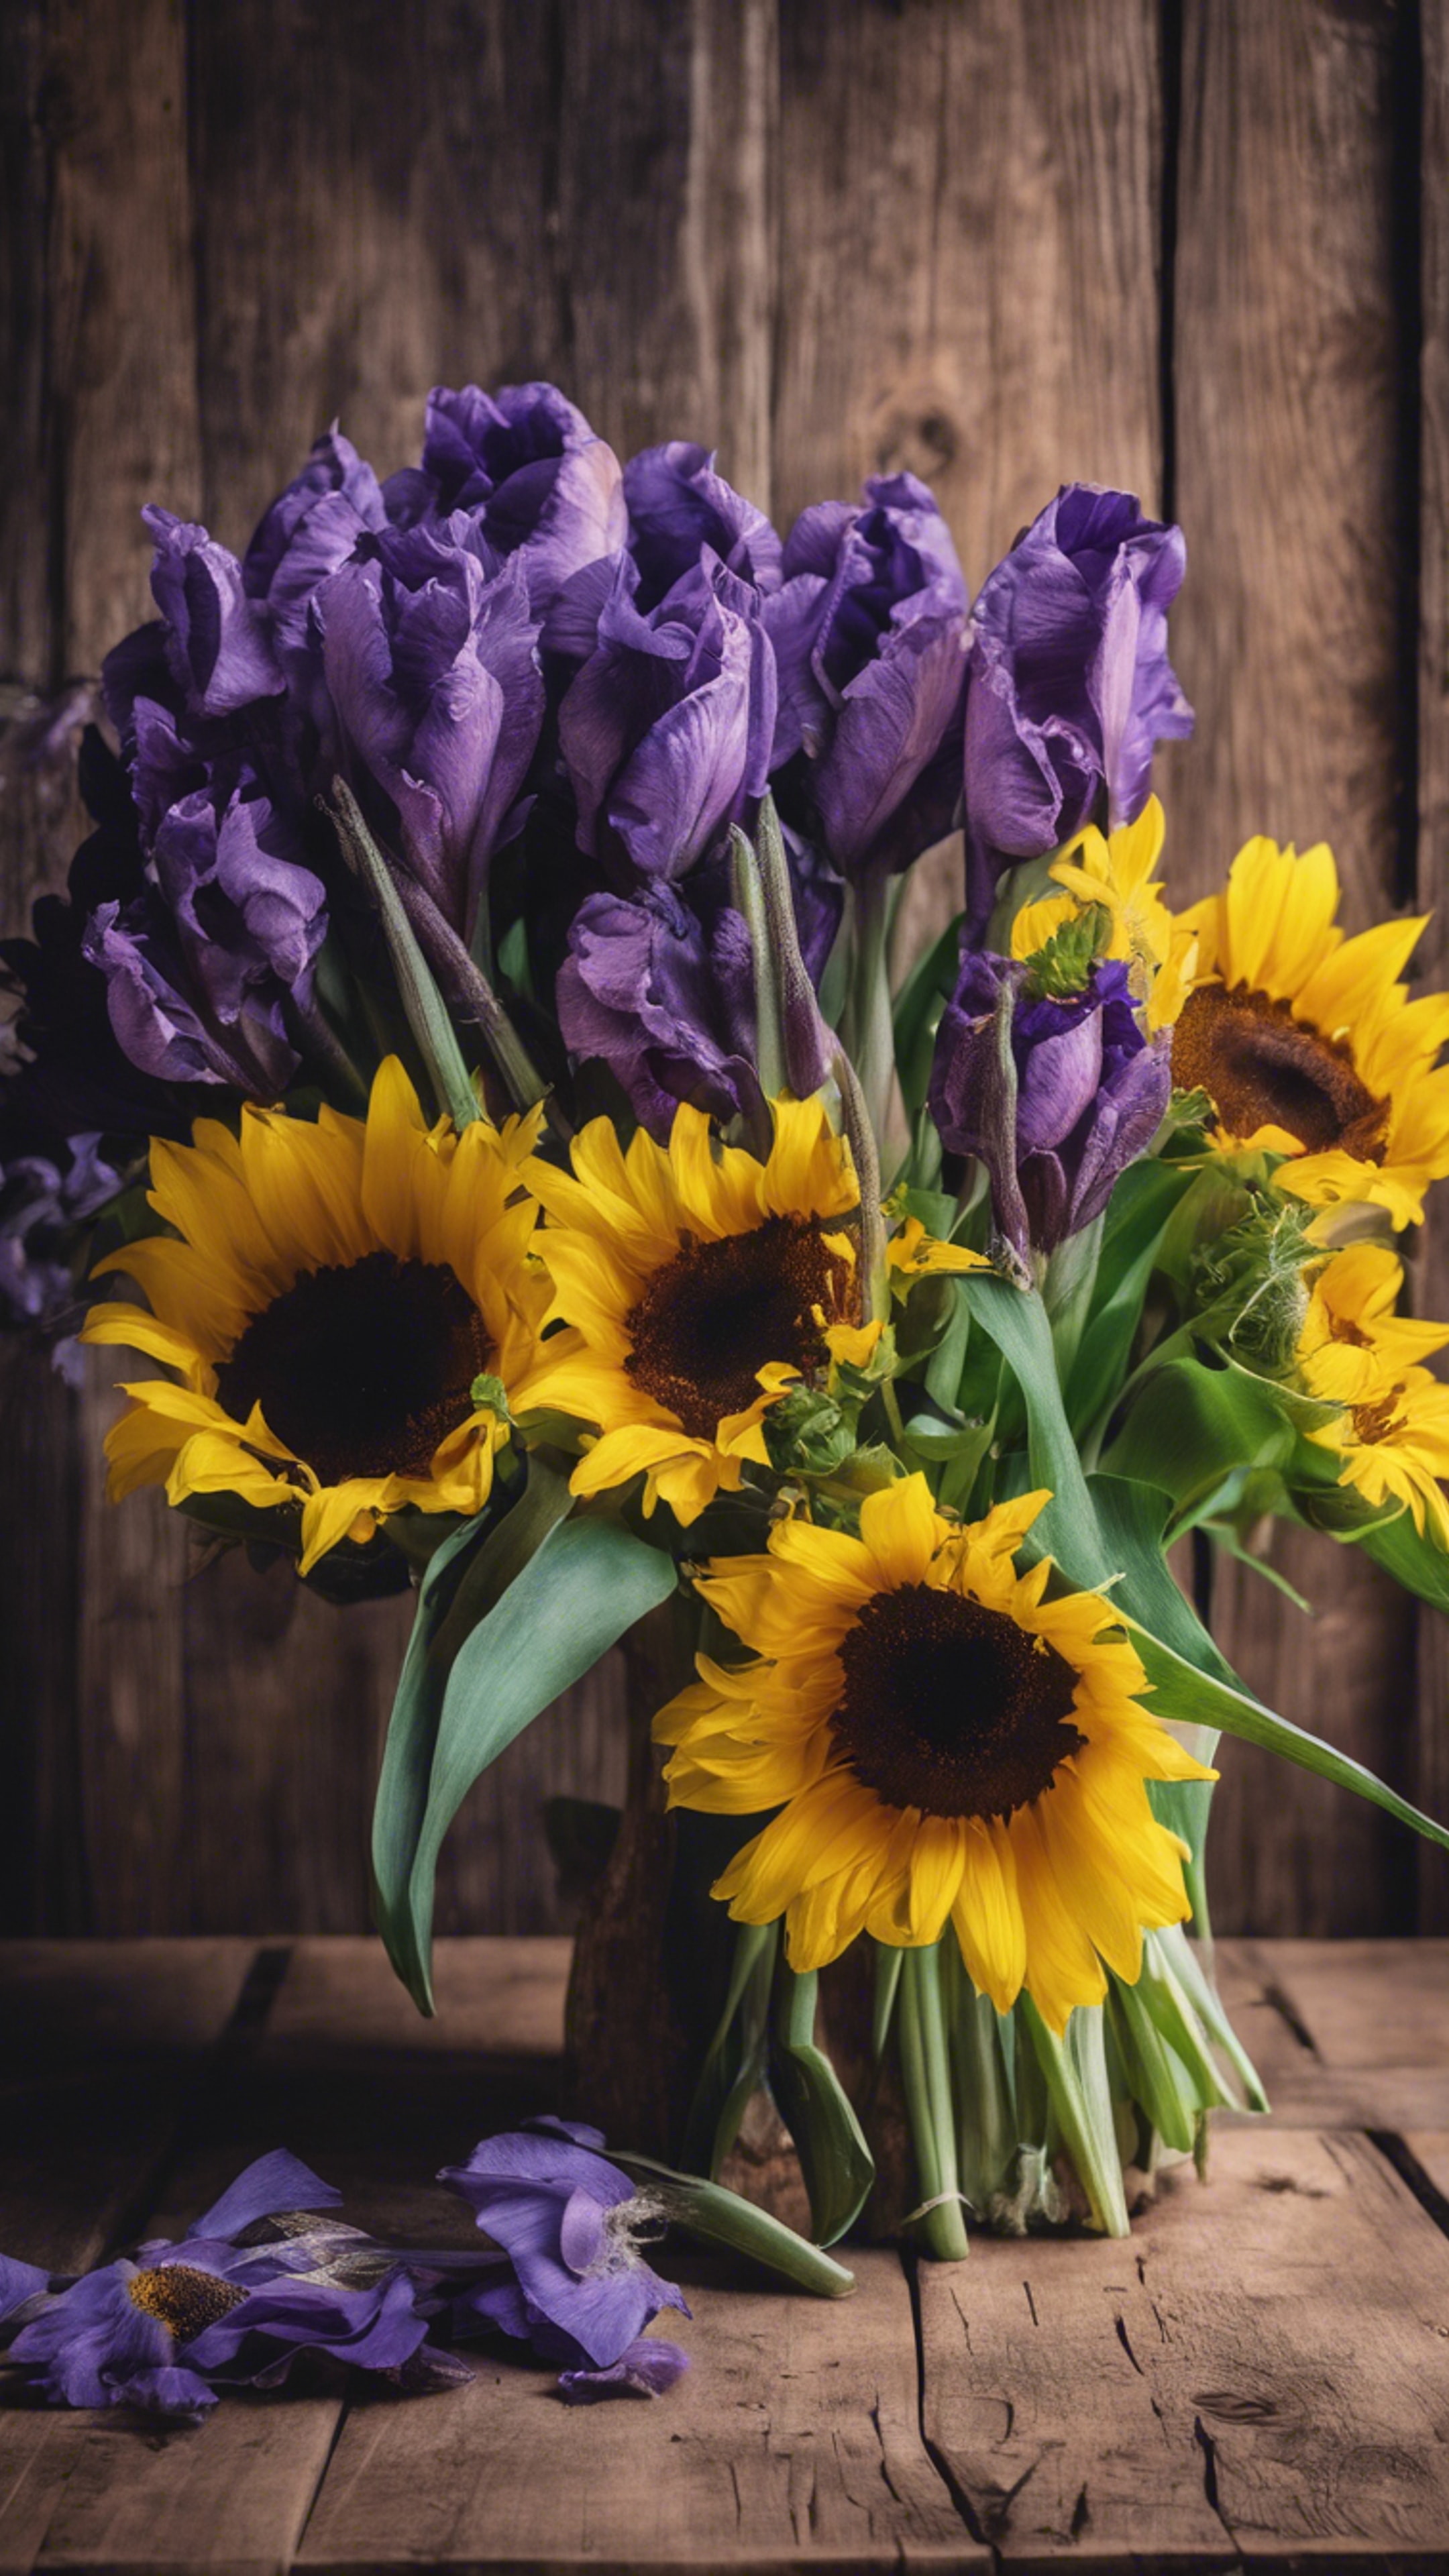 A bouquet of violet irises and bright yellow sunflowers sitting on a rustic wooden table. טפט[036542cc0bff4a9eafa2]